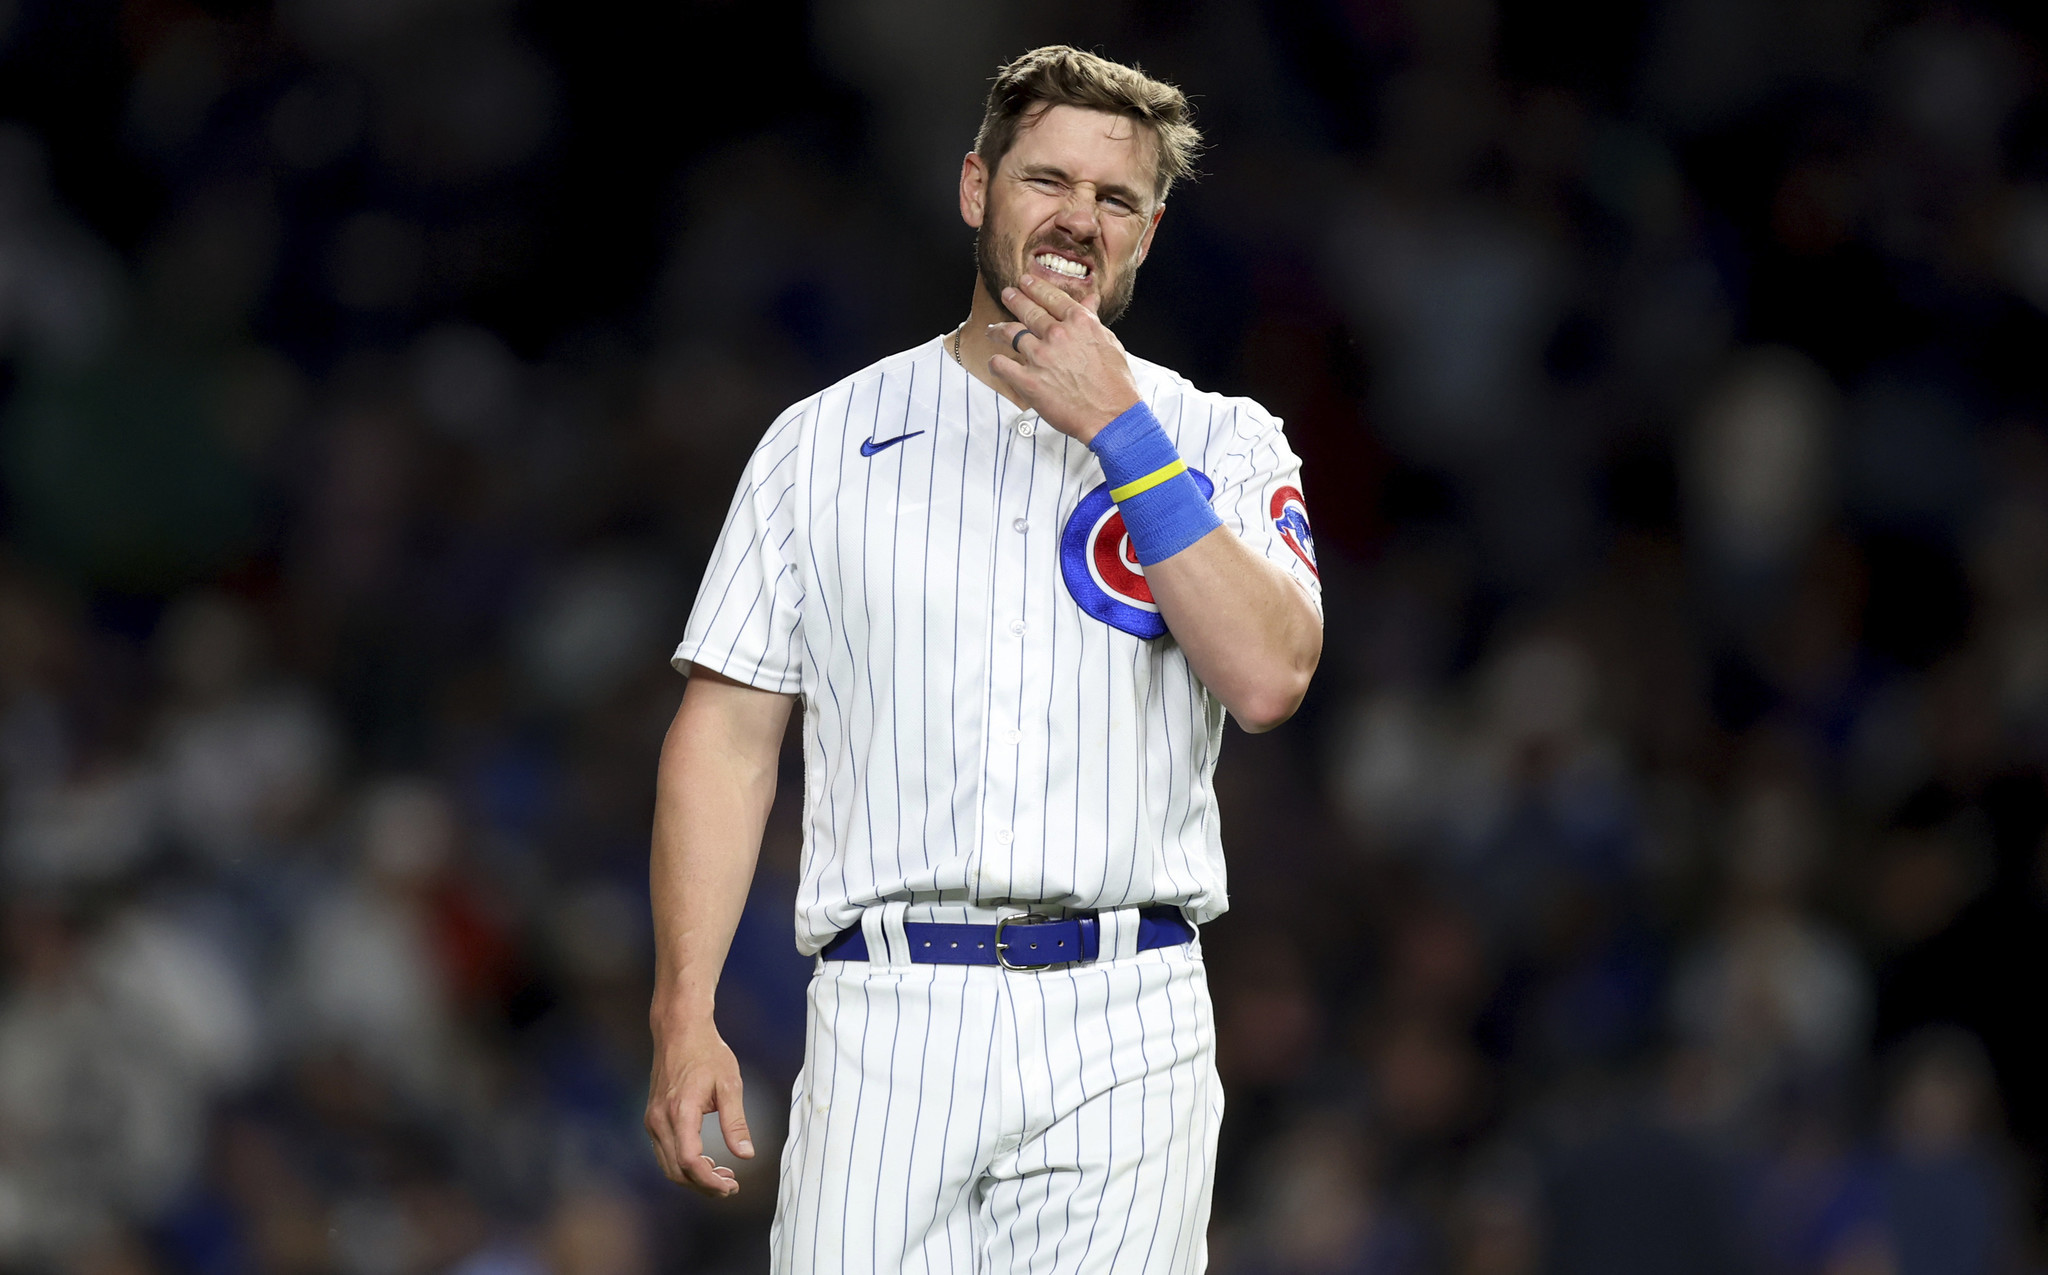 Cubs drop back-and-forth game to Padres despite Trey Mancini's